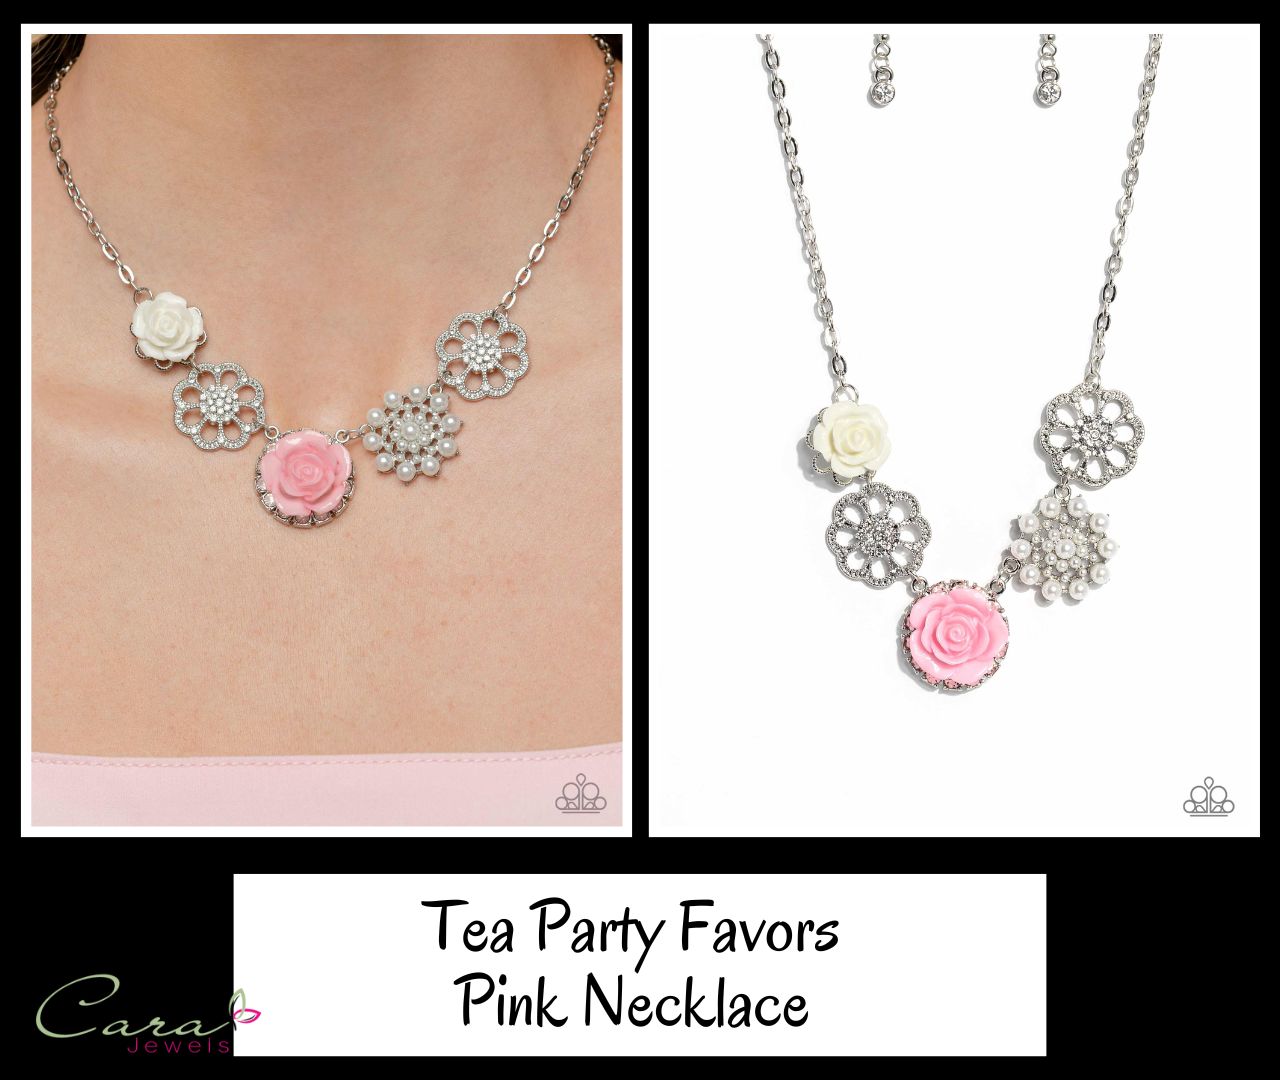 Paparazzi Tea Party Favors Pink Necklace collage - Life of the Party April 2023 on CarasShop.com